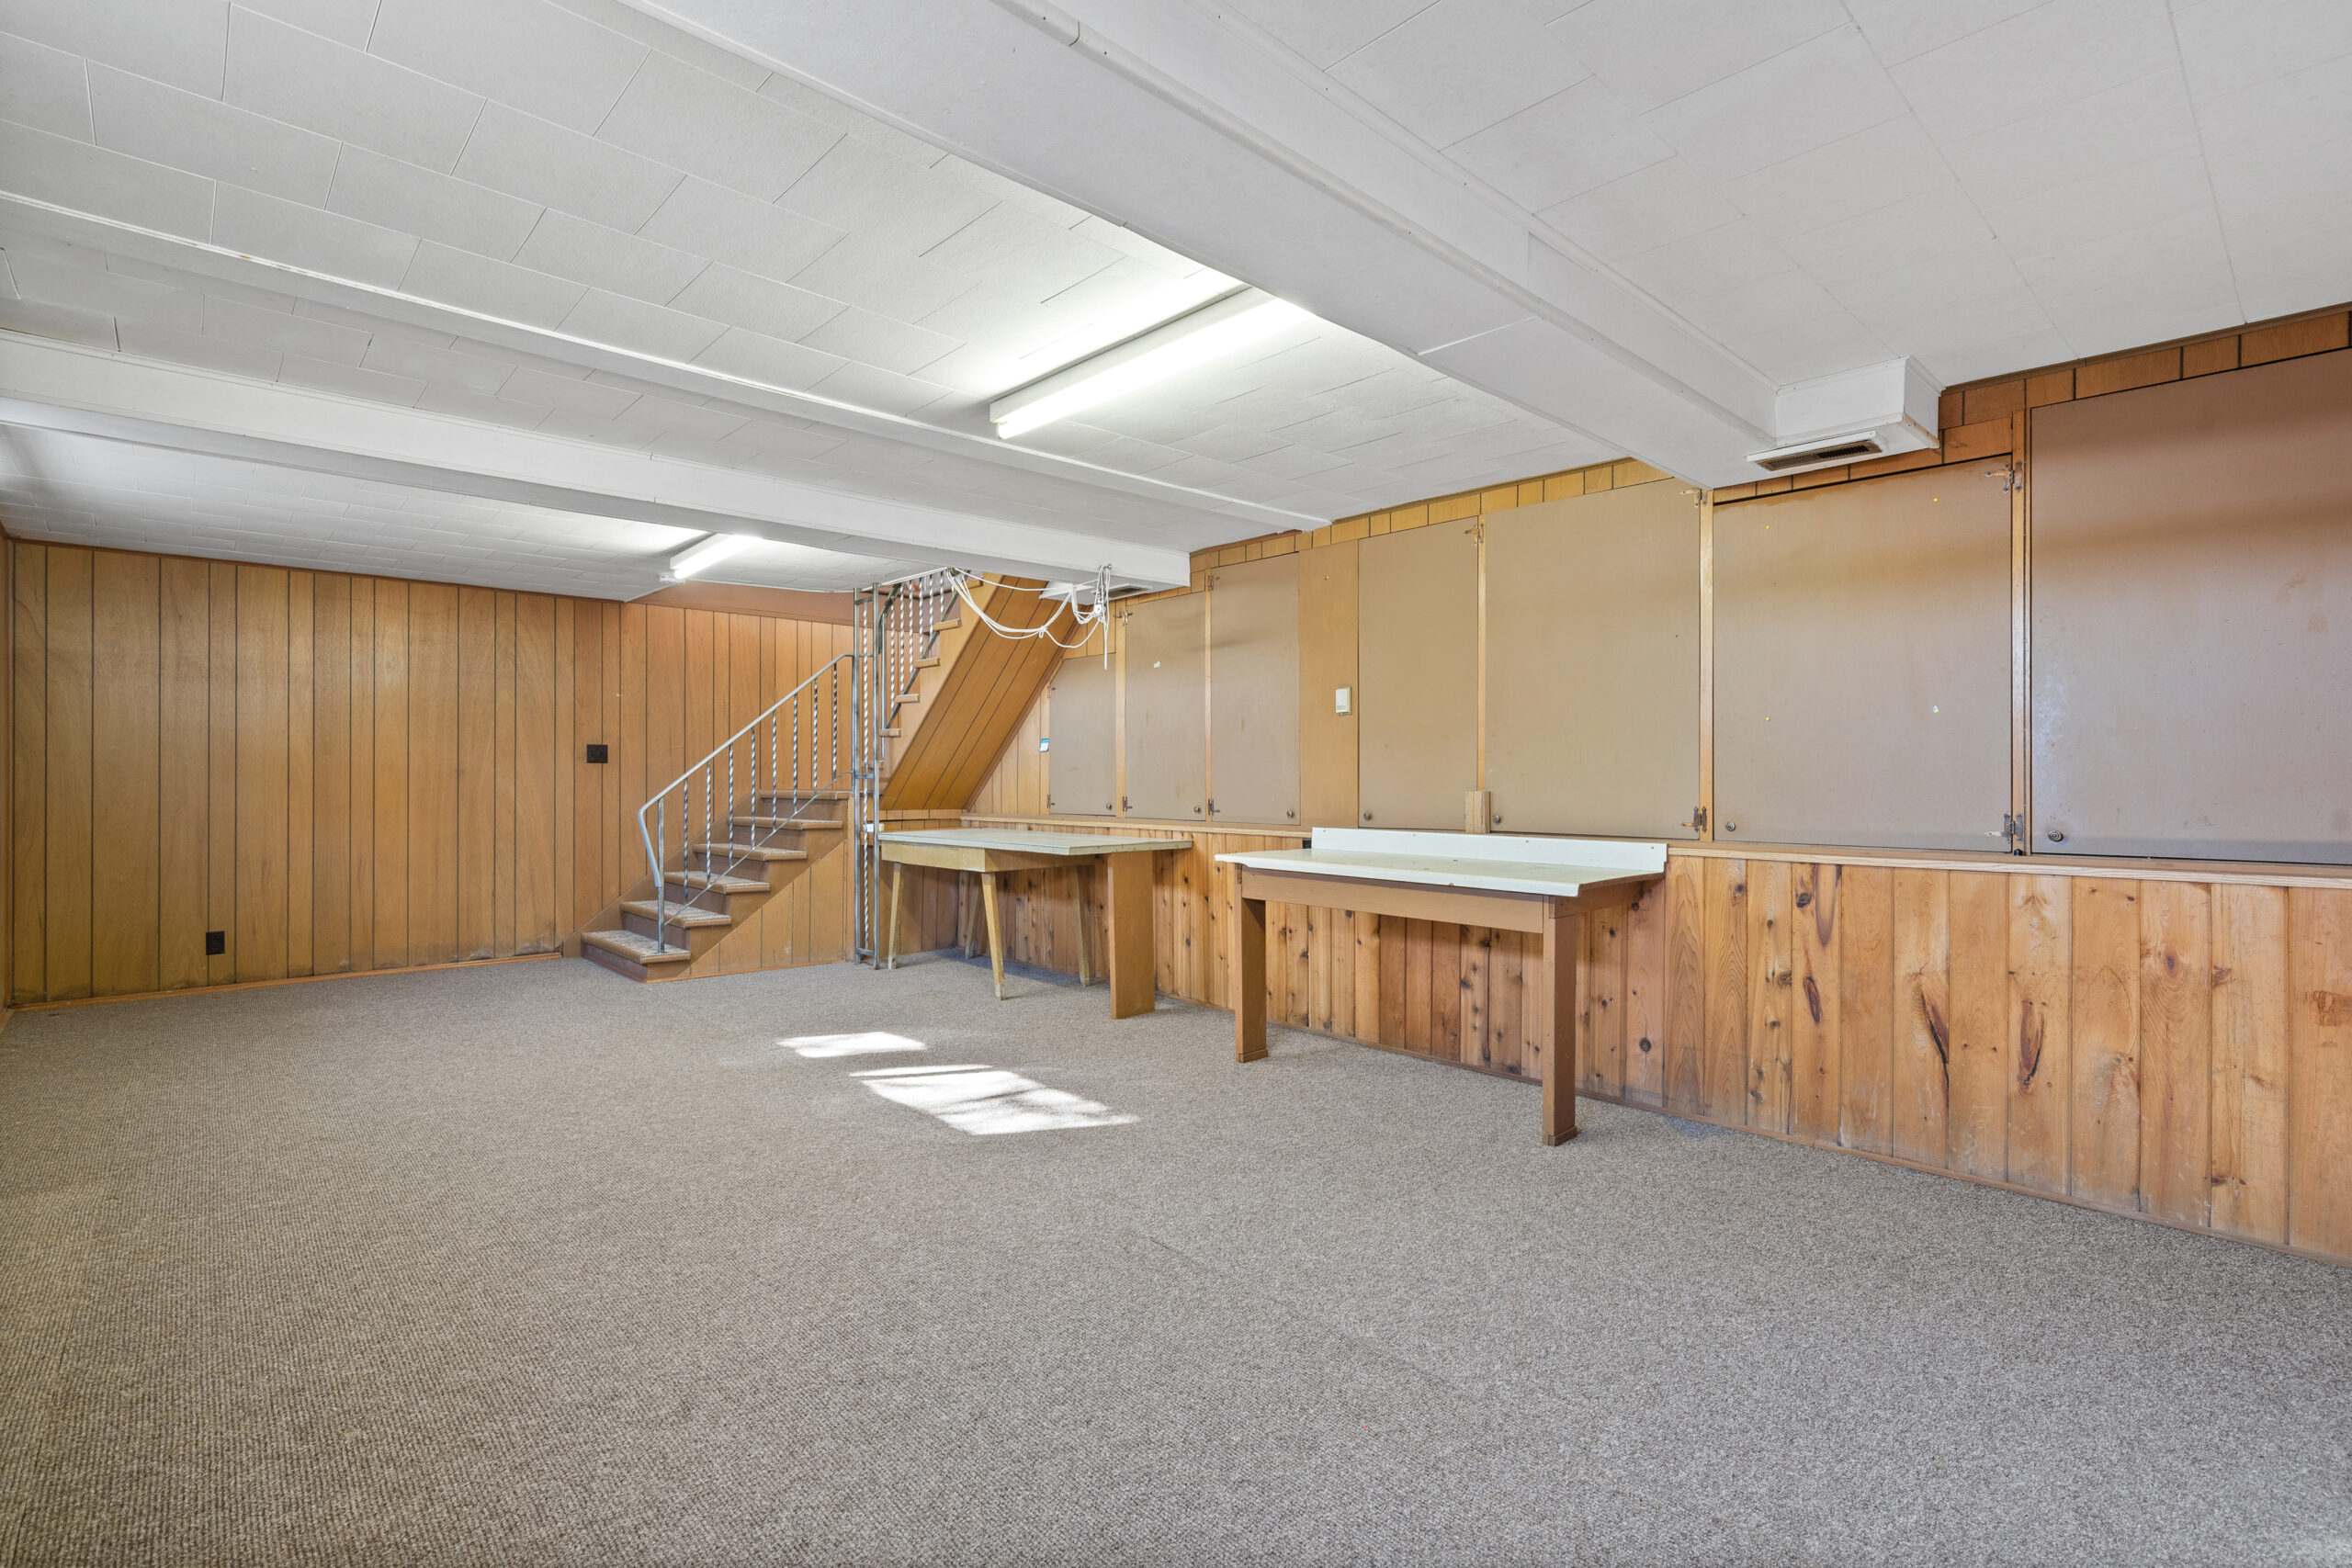 An empty lower-level rec room space with wood-panelled walls.